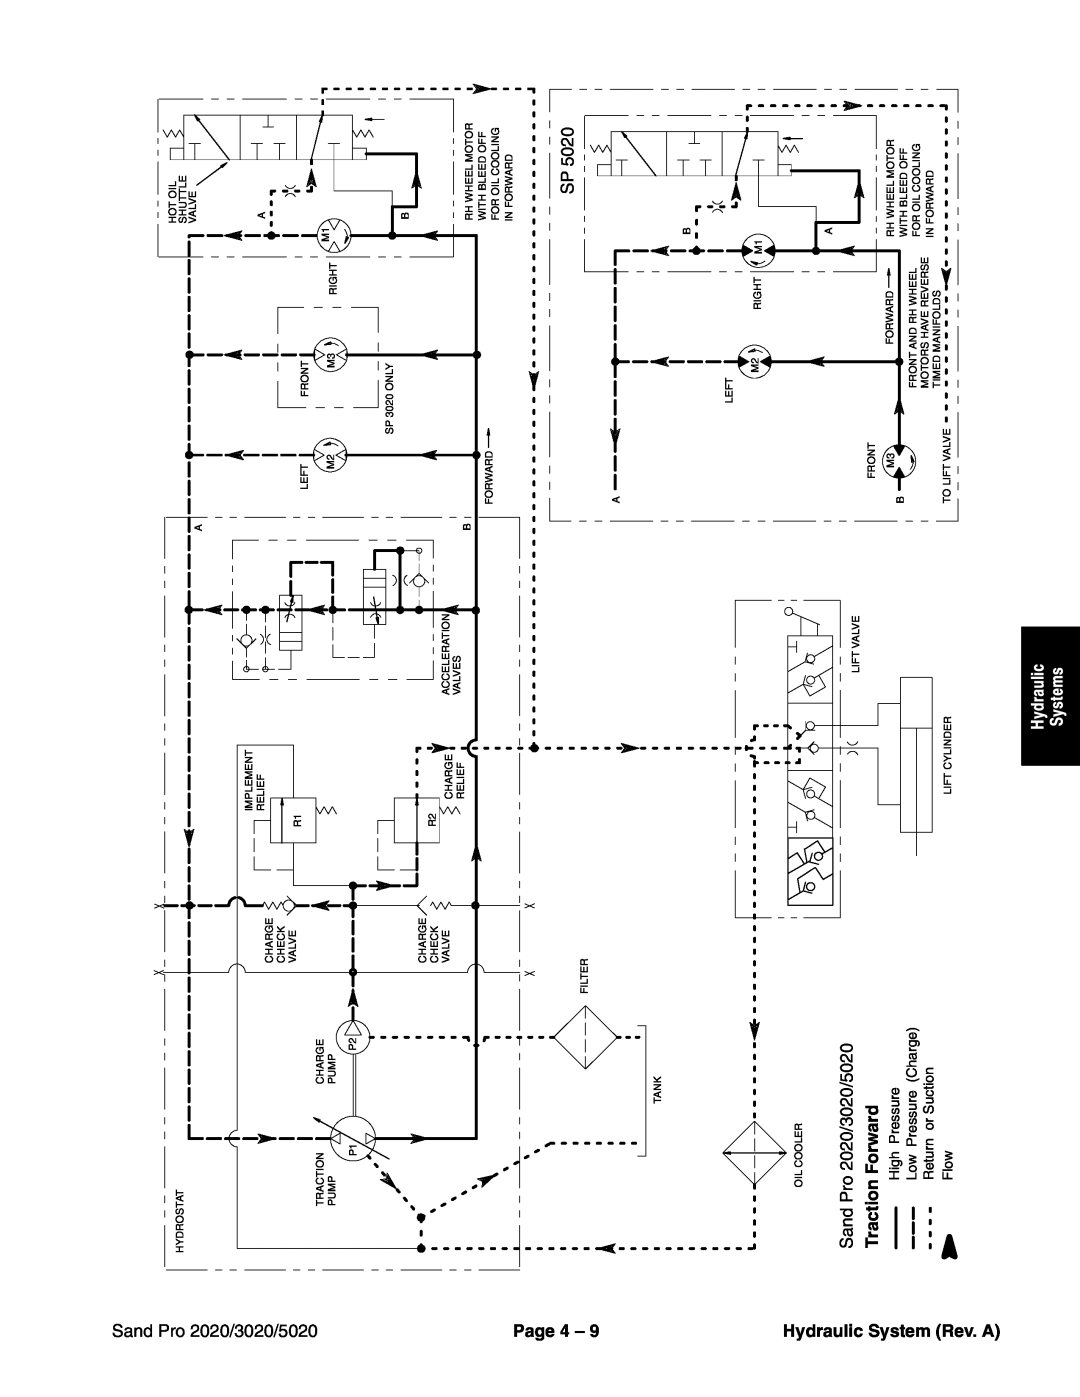 Toro 3020, 5020, 2020 service manual Page 4 Hydraulic System Rev. A, Traction Forward, Hydraulic Systems 